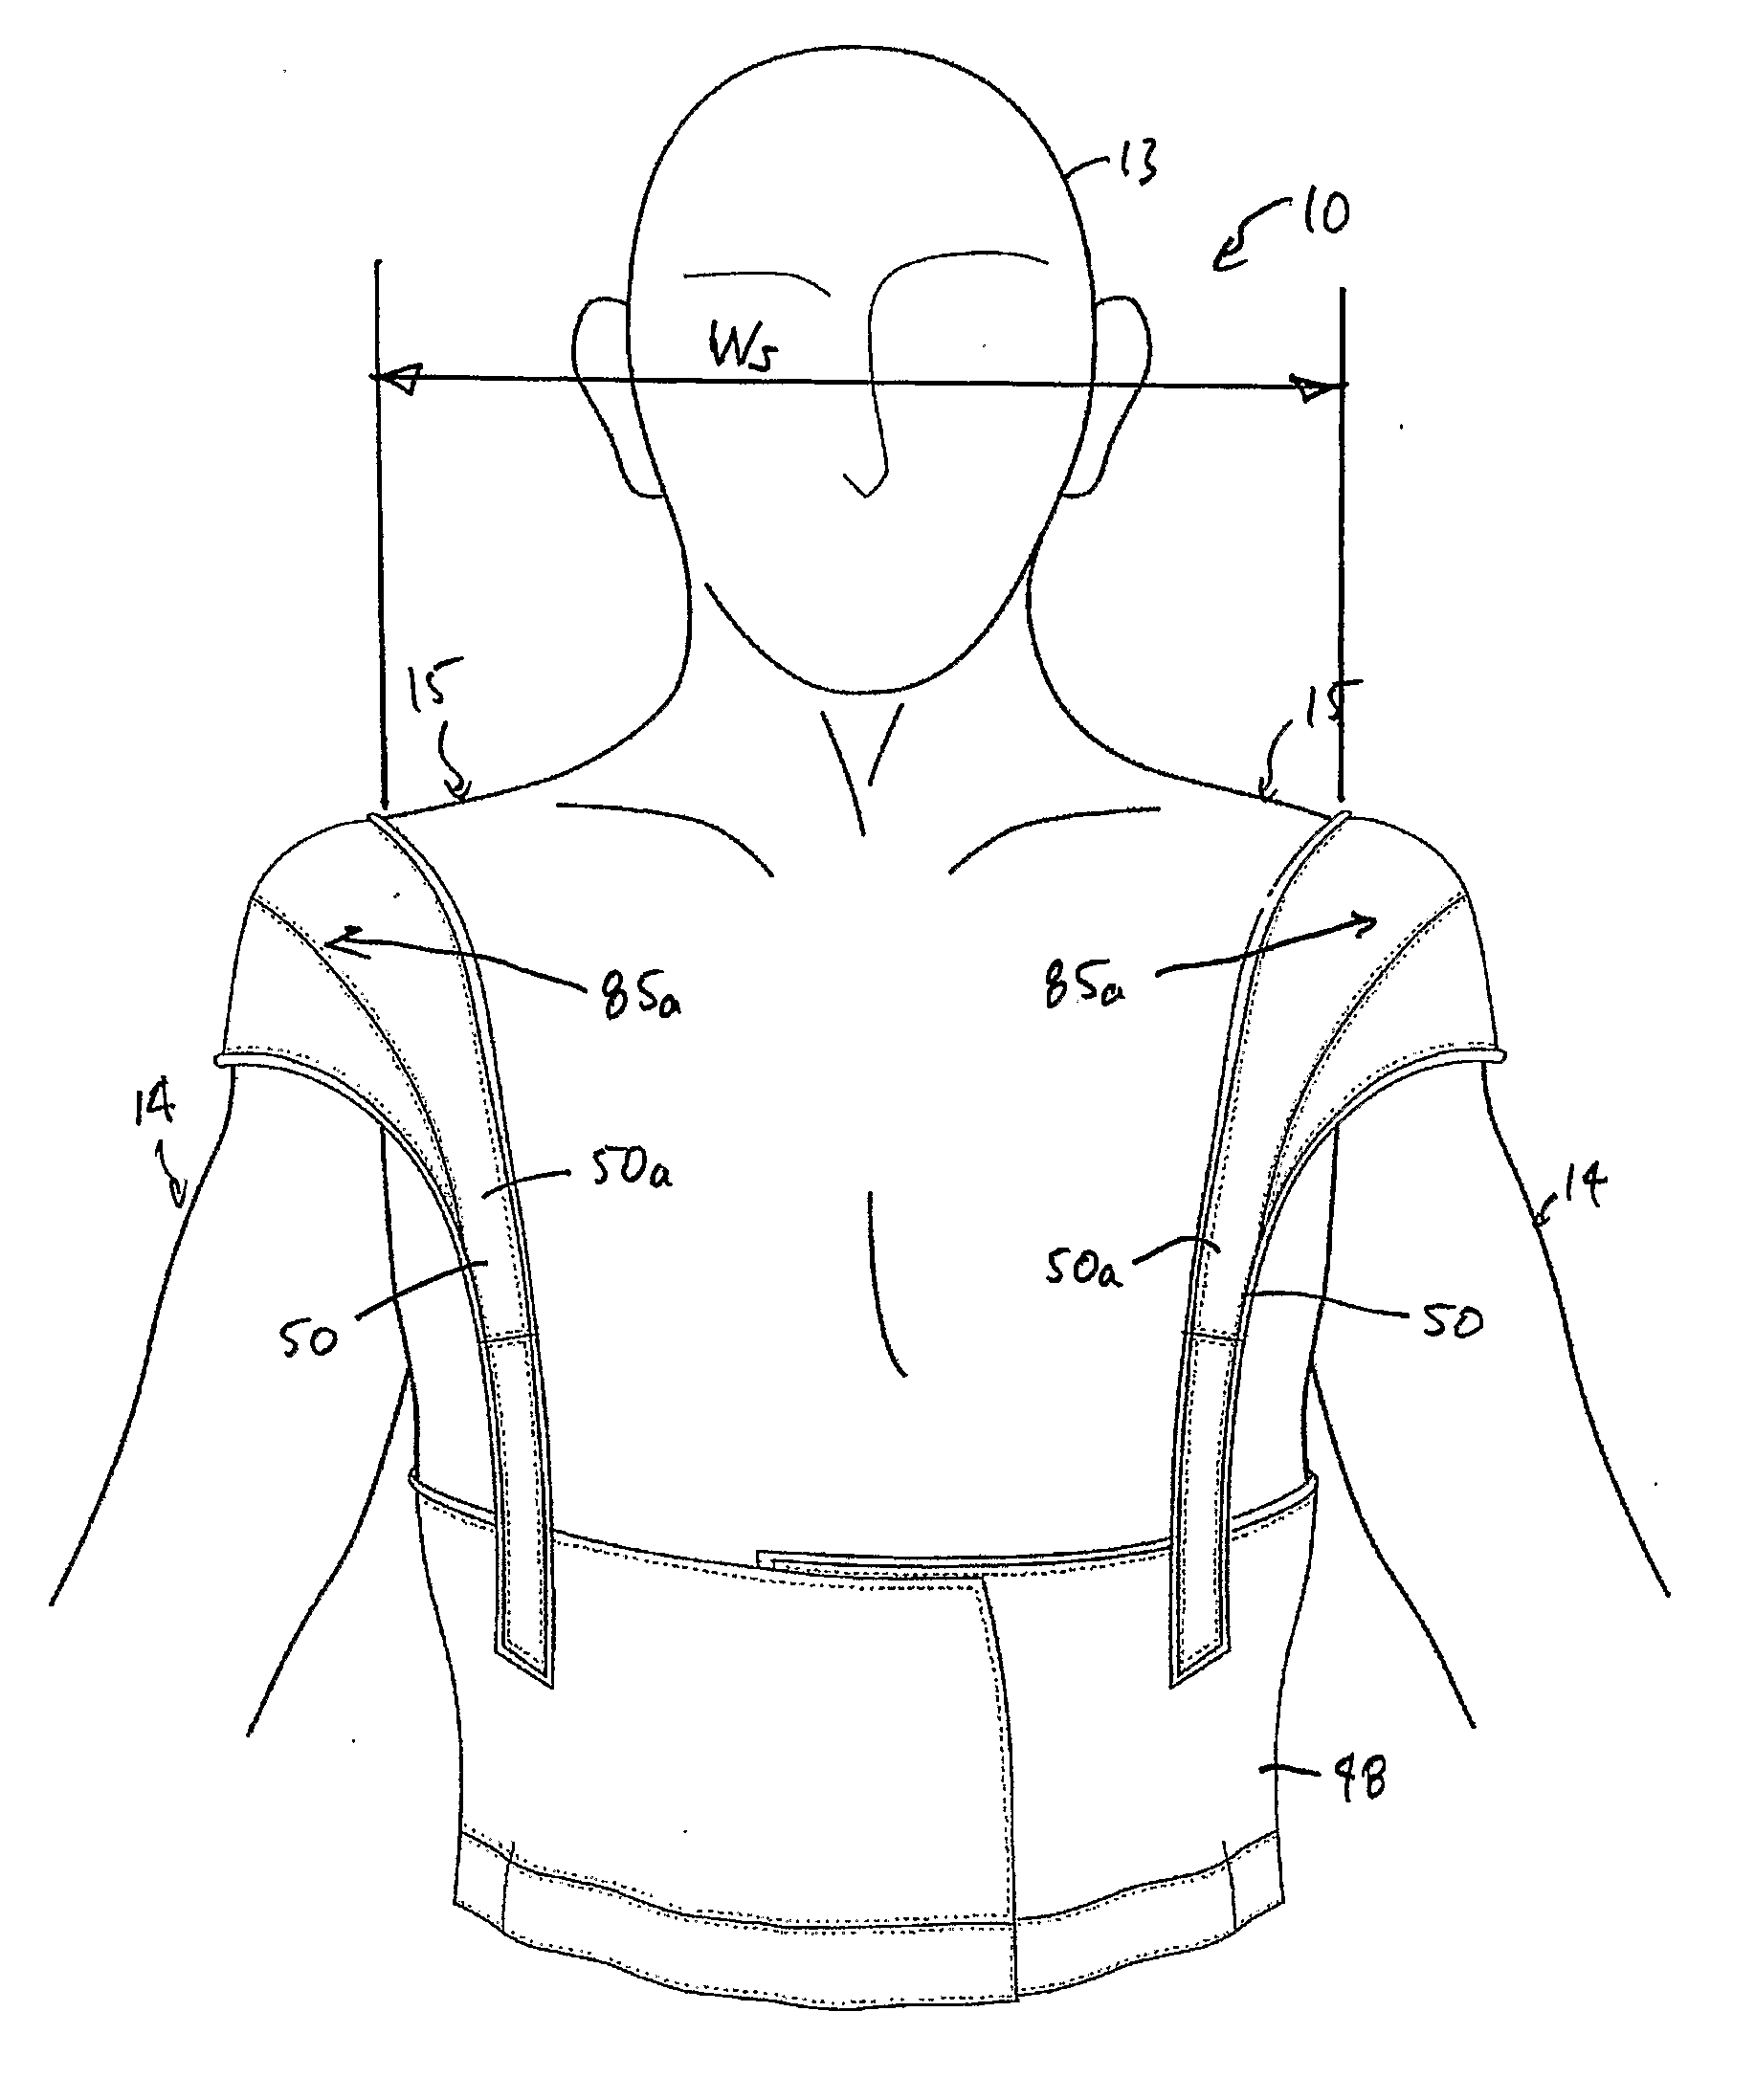 Posture Support Device